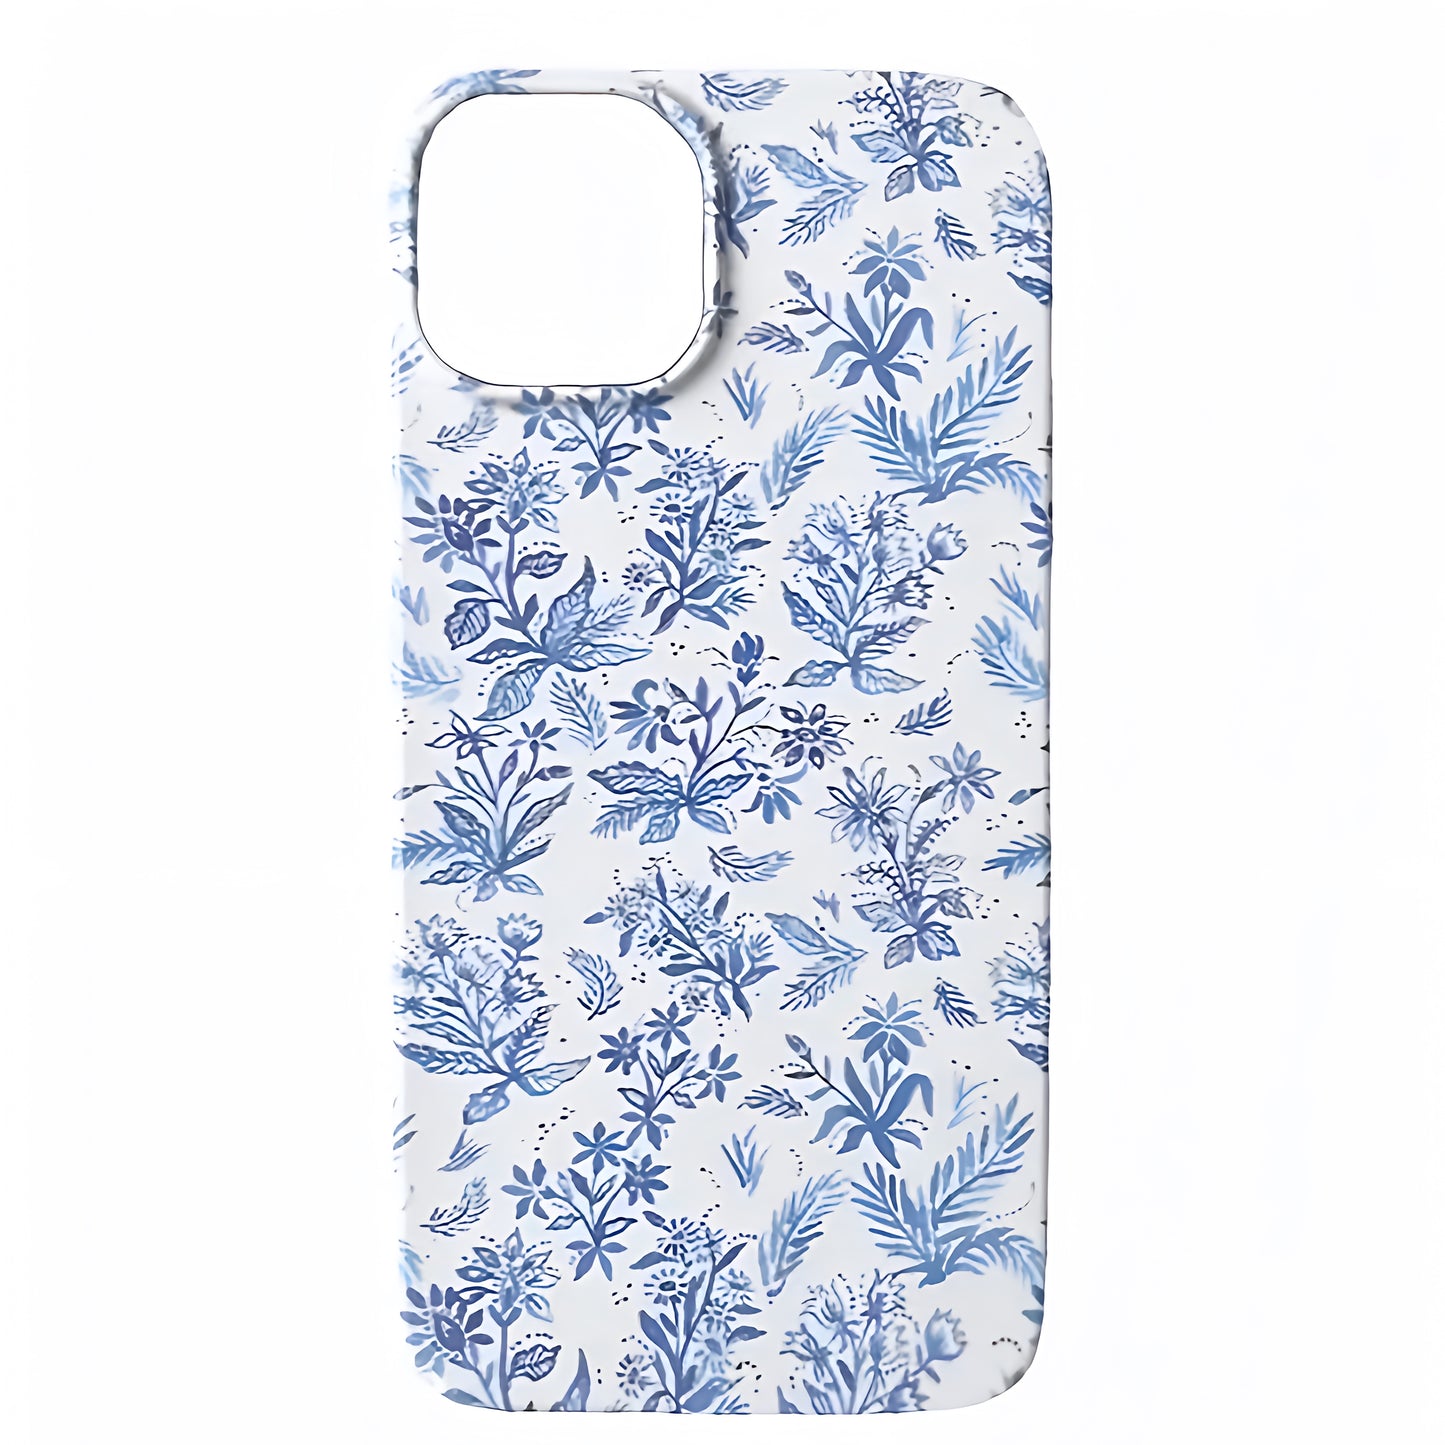 floral-print-light-blue-and-white-flower-patterned-design-hard-plastic-high-quality-shock-proof-phone-case-for-iphone-chic-trendy-women-ladies-girls-spring-2024-summer-feminine-elegant-preppy-coastal-granddaughter-beach-vacation-style-wildflower-casetify-dupe